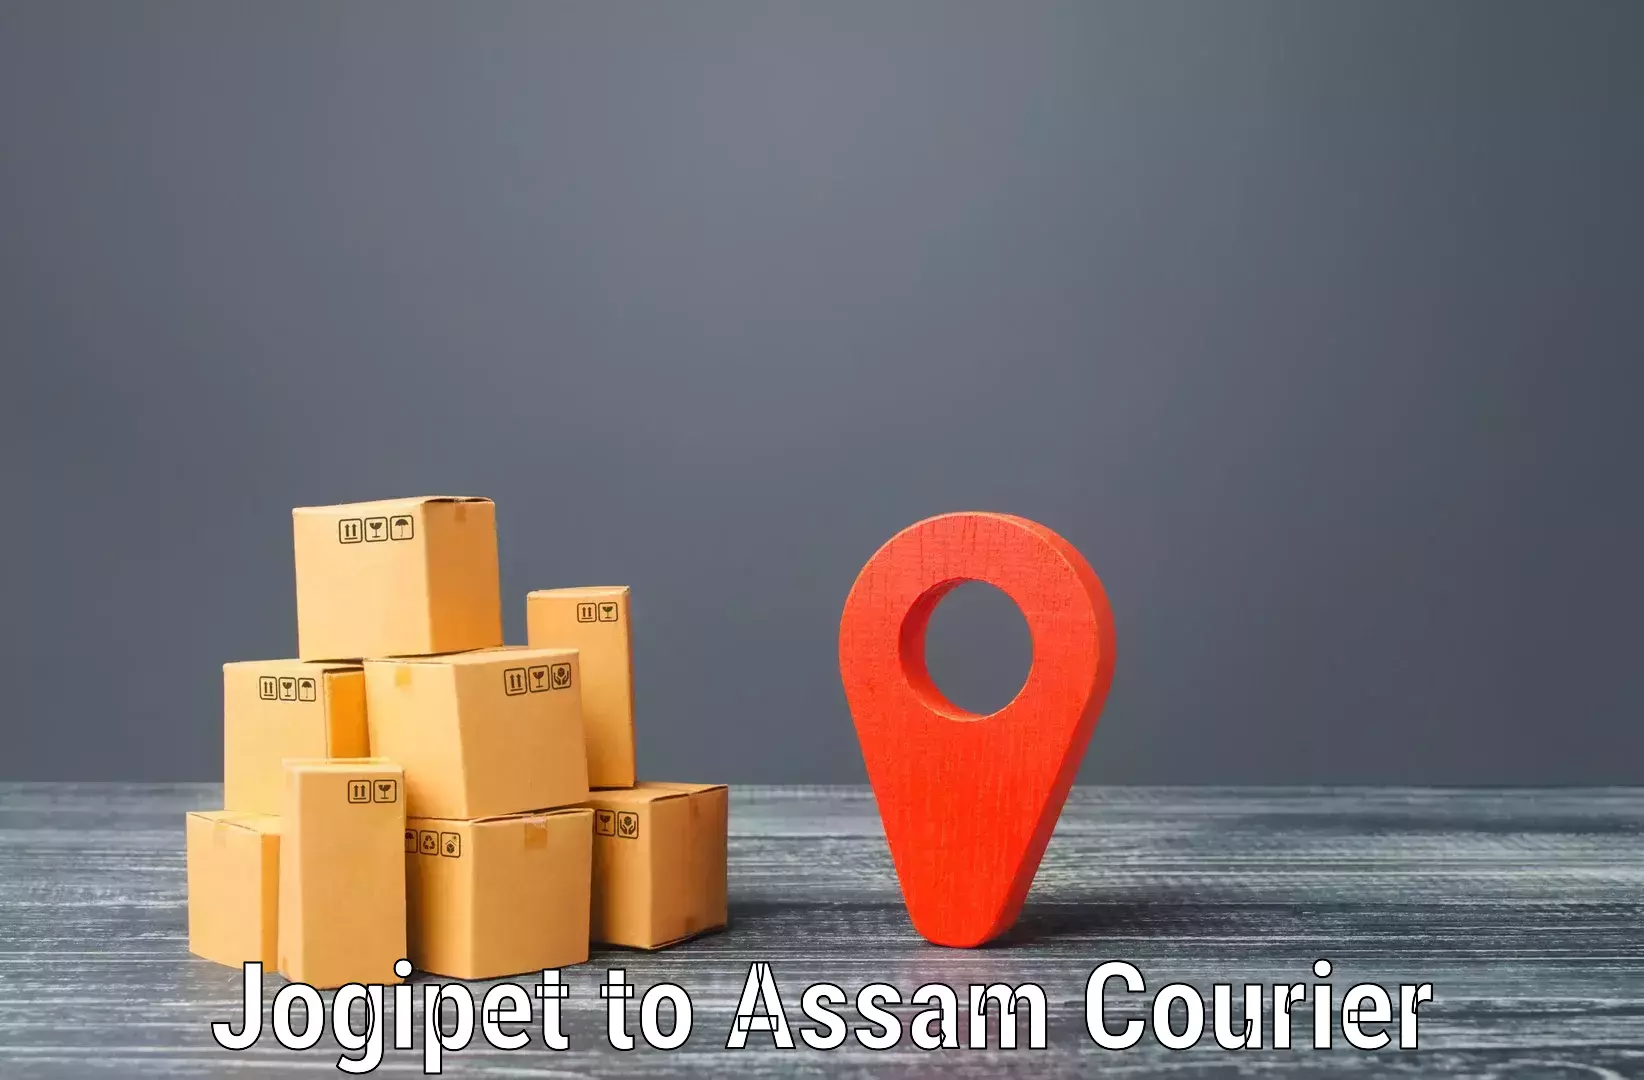 International courier networks Jogipet to Kamrup